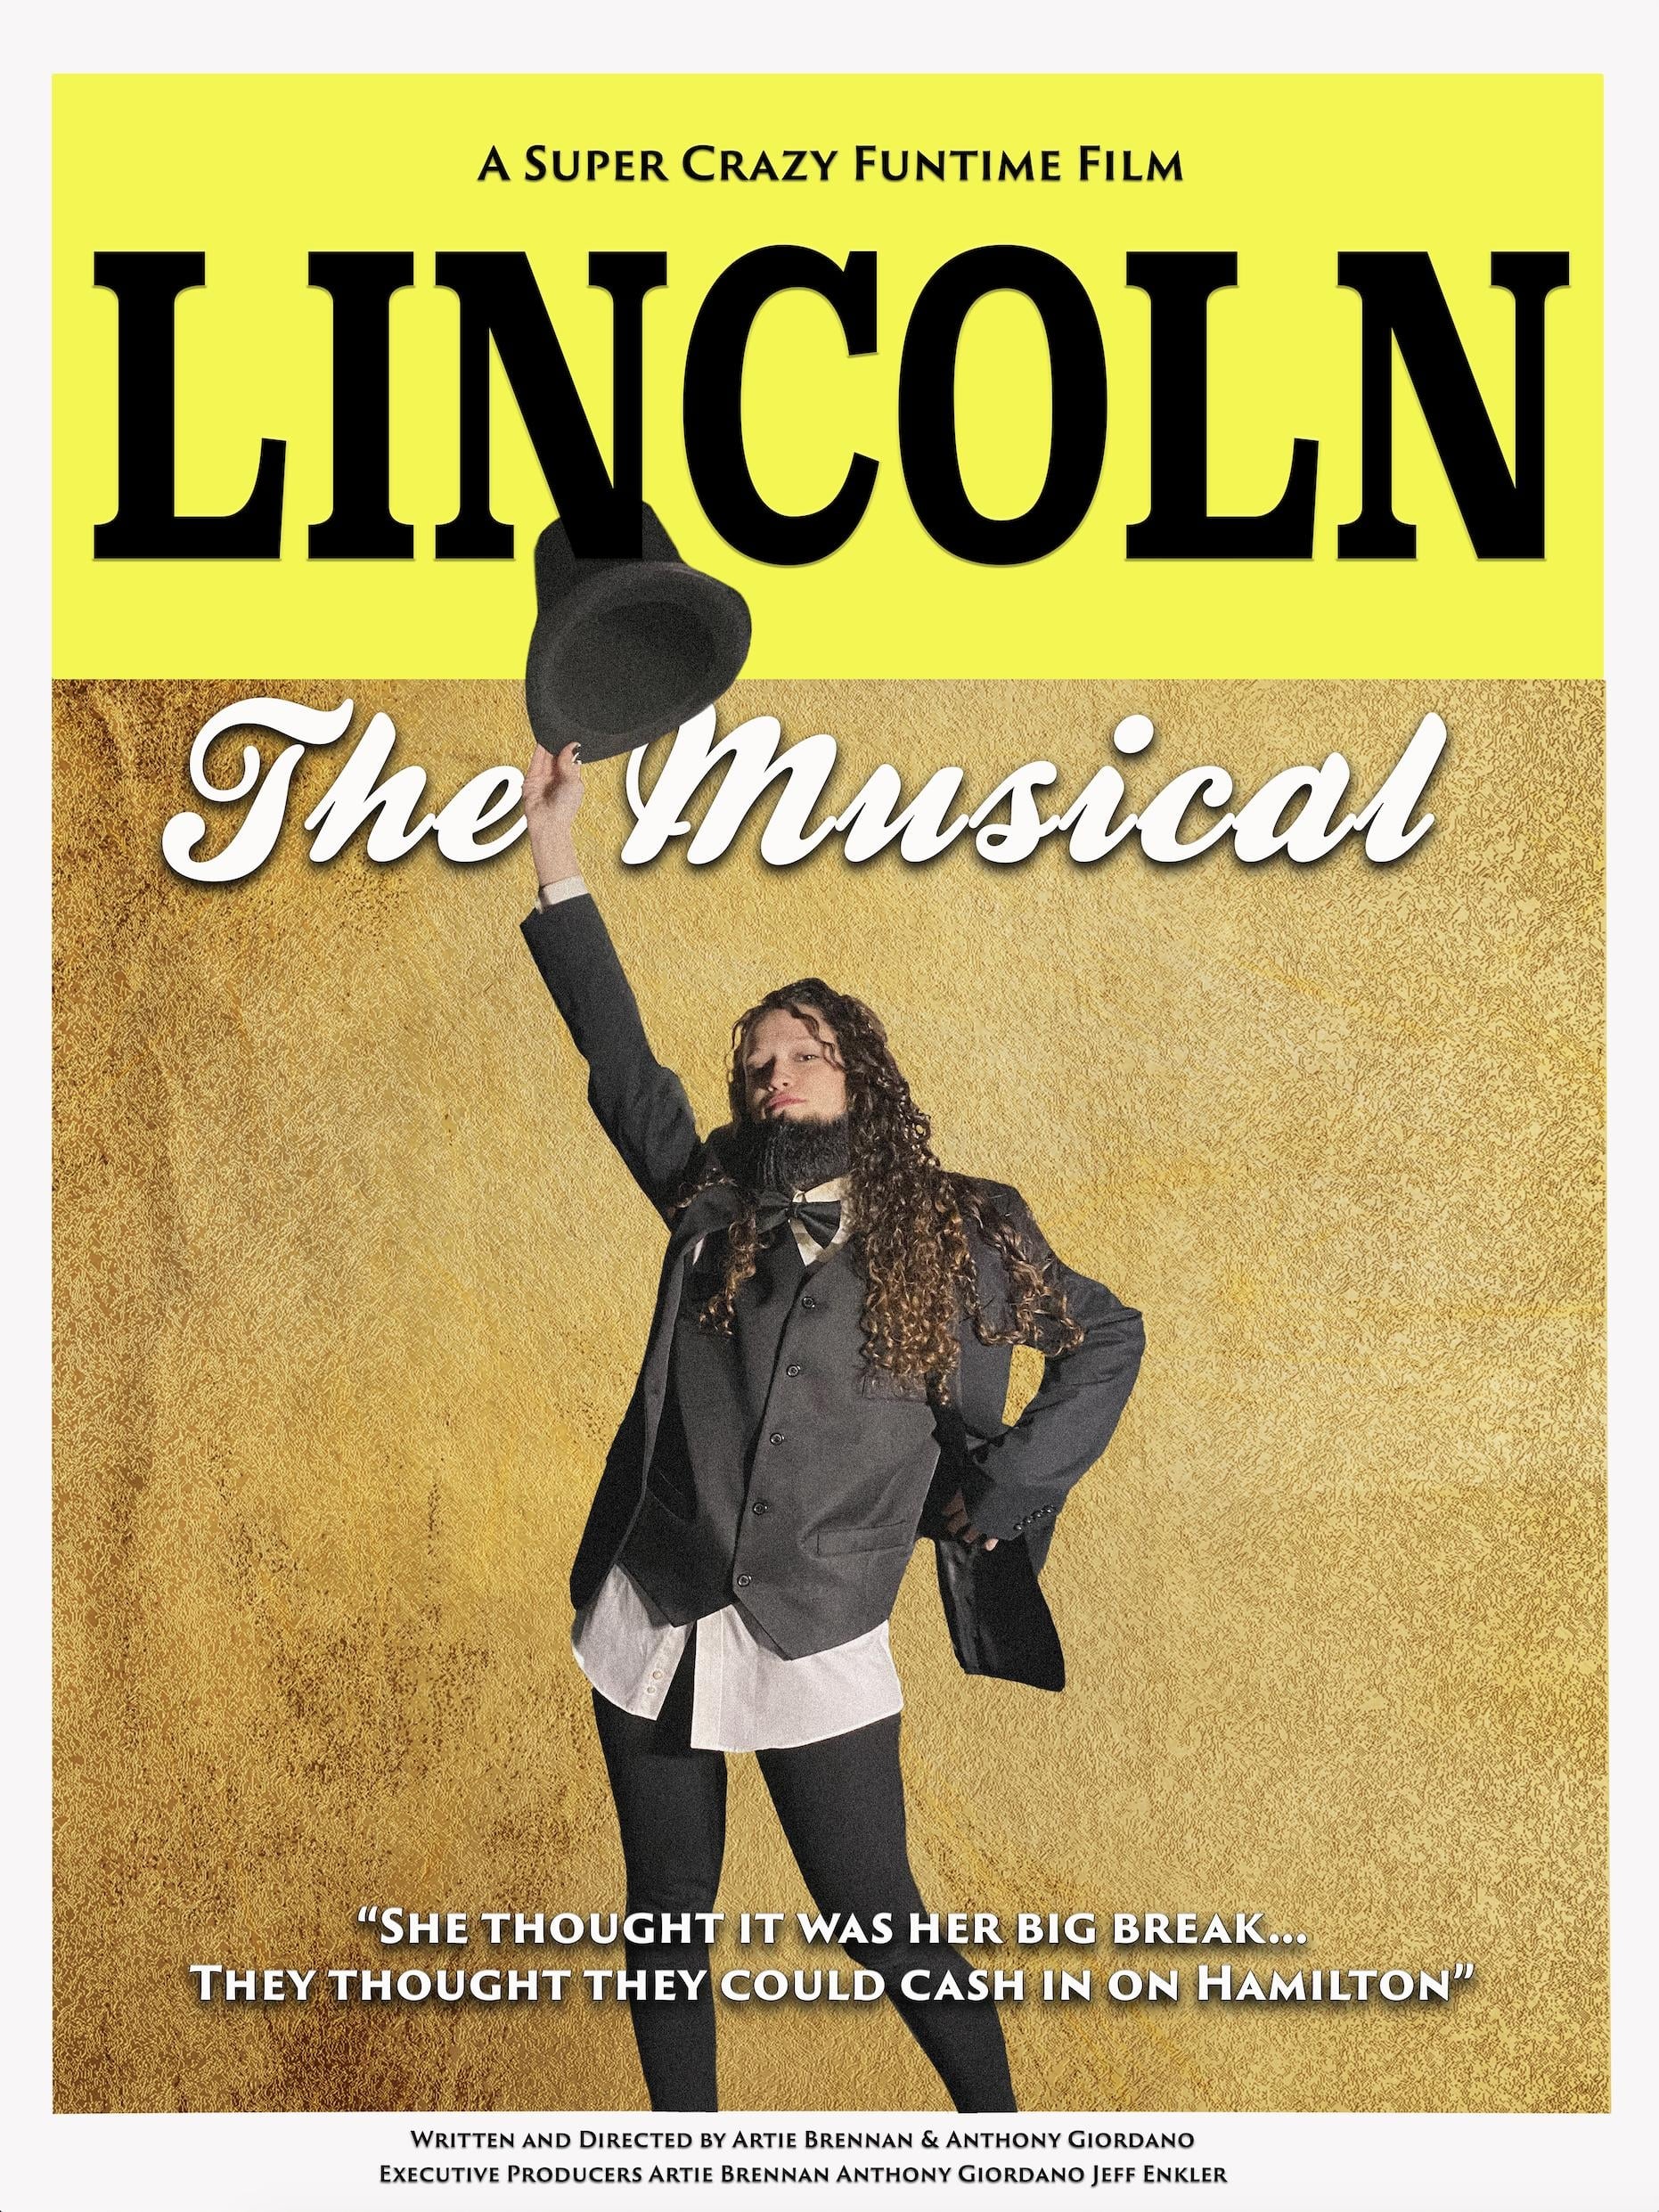 Lincoln The Musical